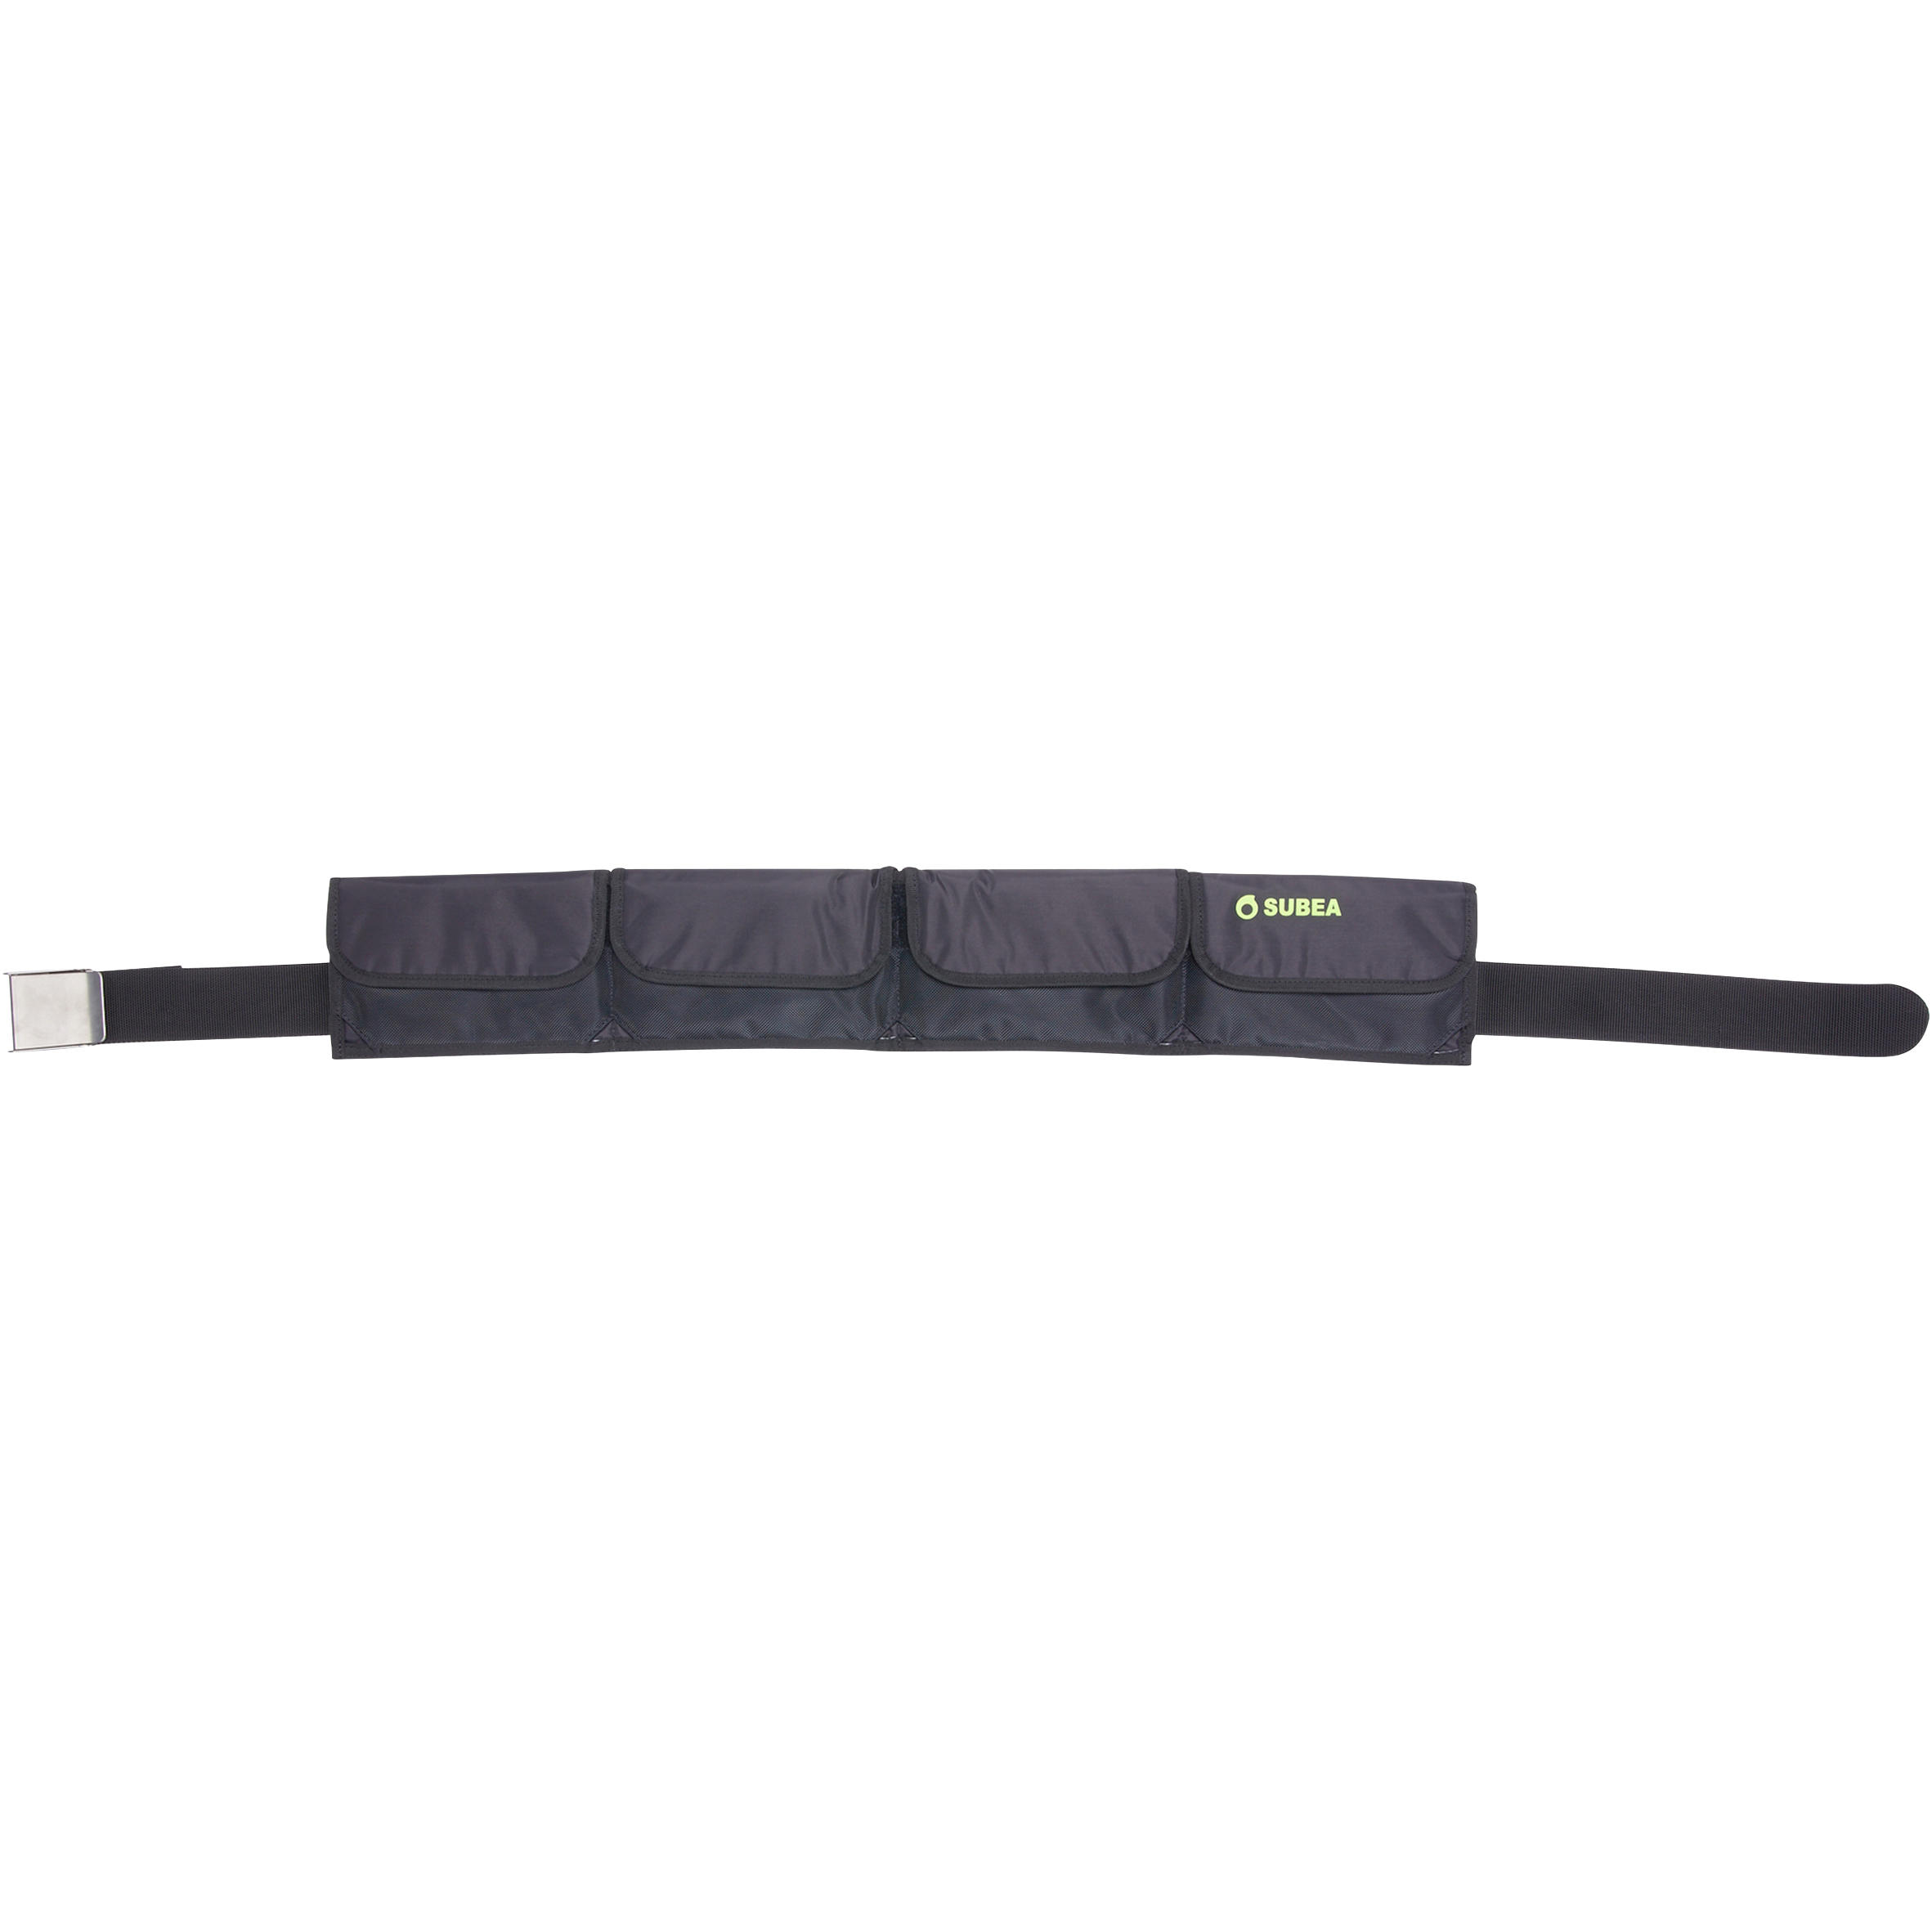 Diving weight belt with soft pockets for lead weights 6/7